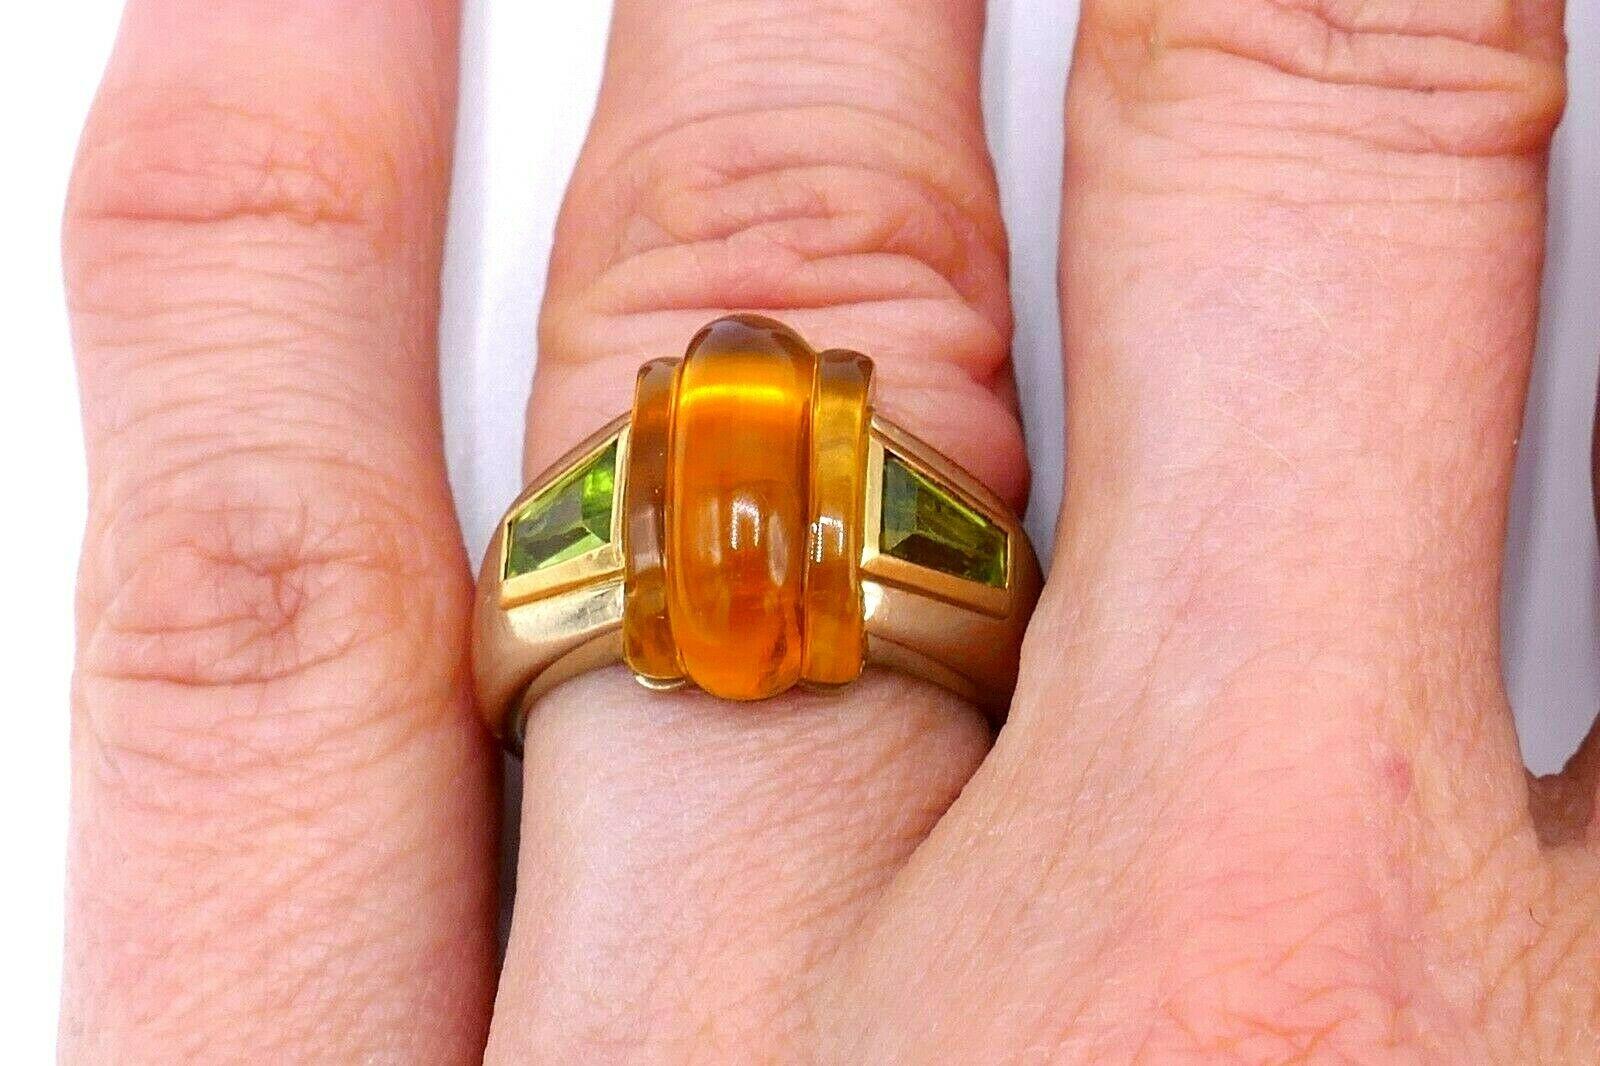 Amazing vintage ring by Bulgari made of 18k (stamped) white and yellow gold, featuring citrine and peridot. Stamped with the Bulgari maker's mark and a hallmark for 18k gold.
Measurements: the ring size is 5.5. Citrine's height is 1/2, width 3/8